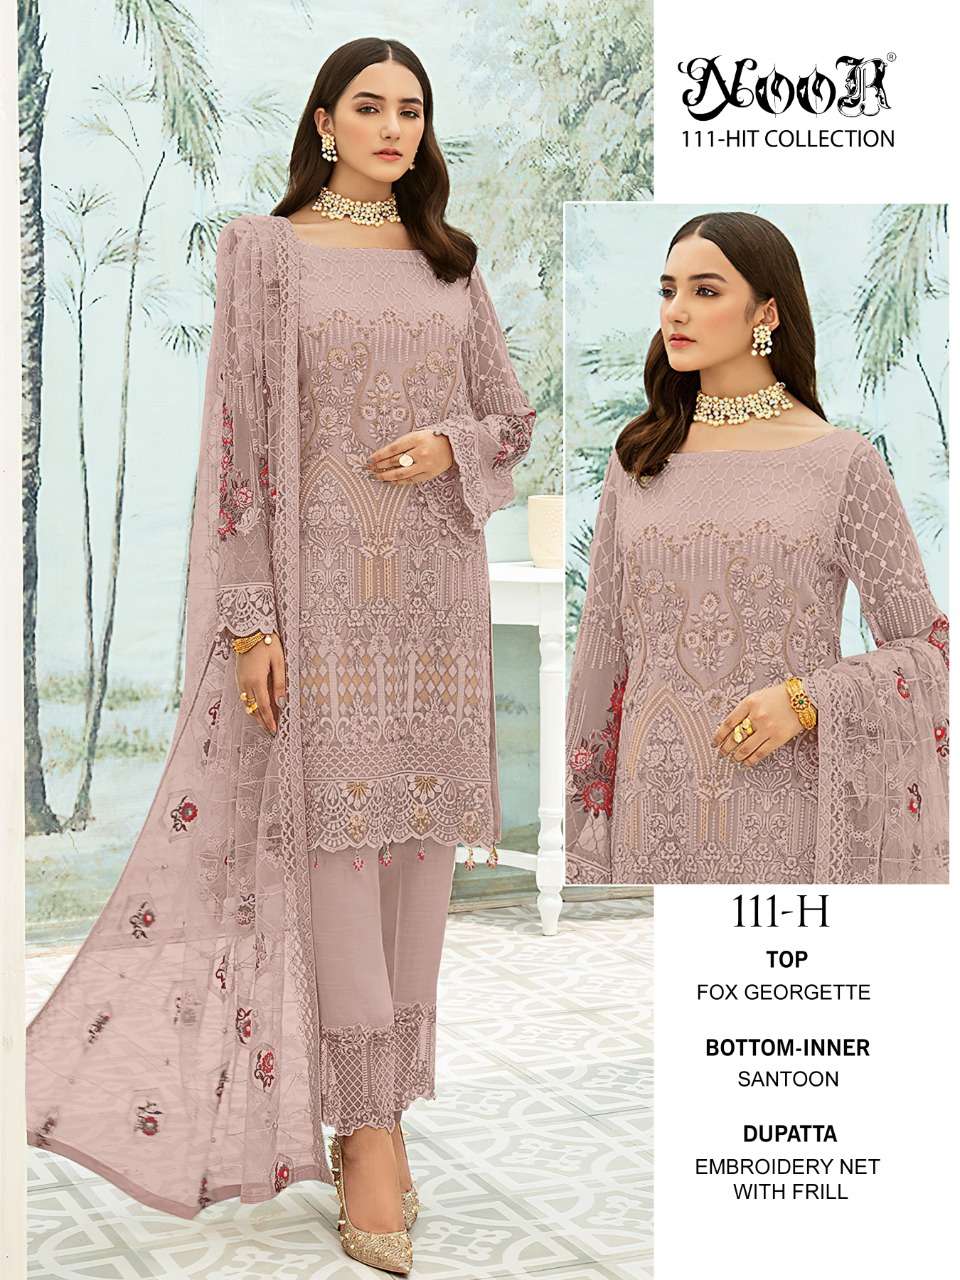 Noor Hit Collection 111-H